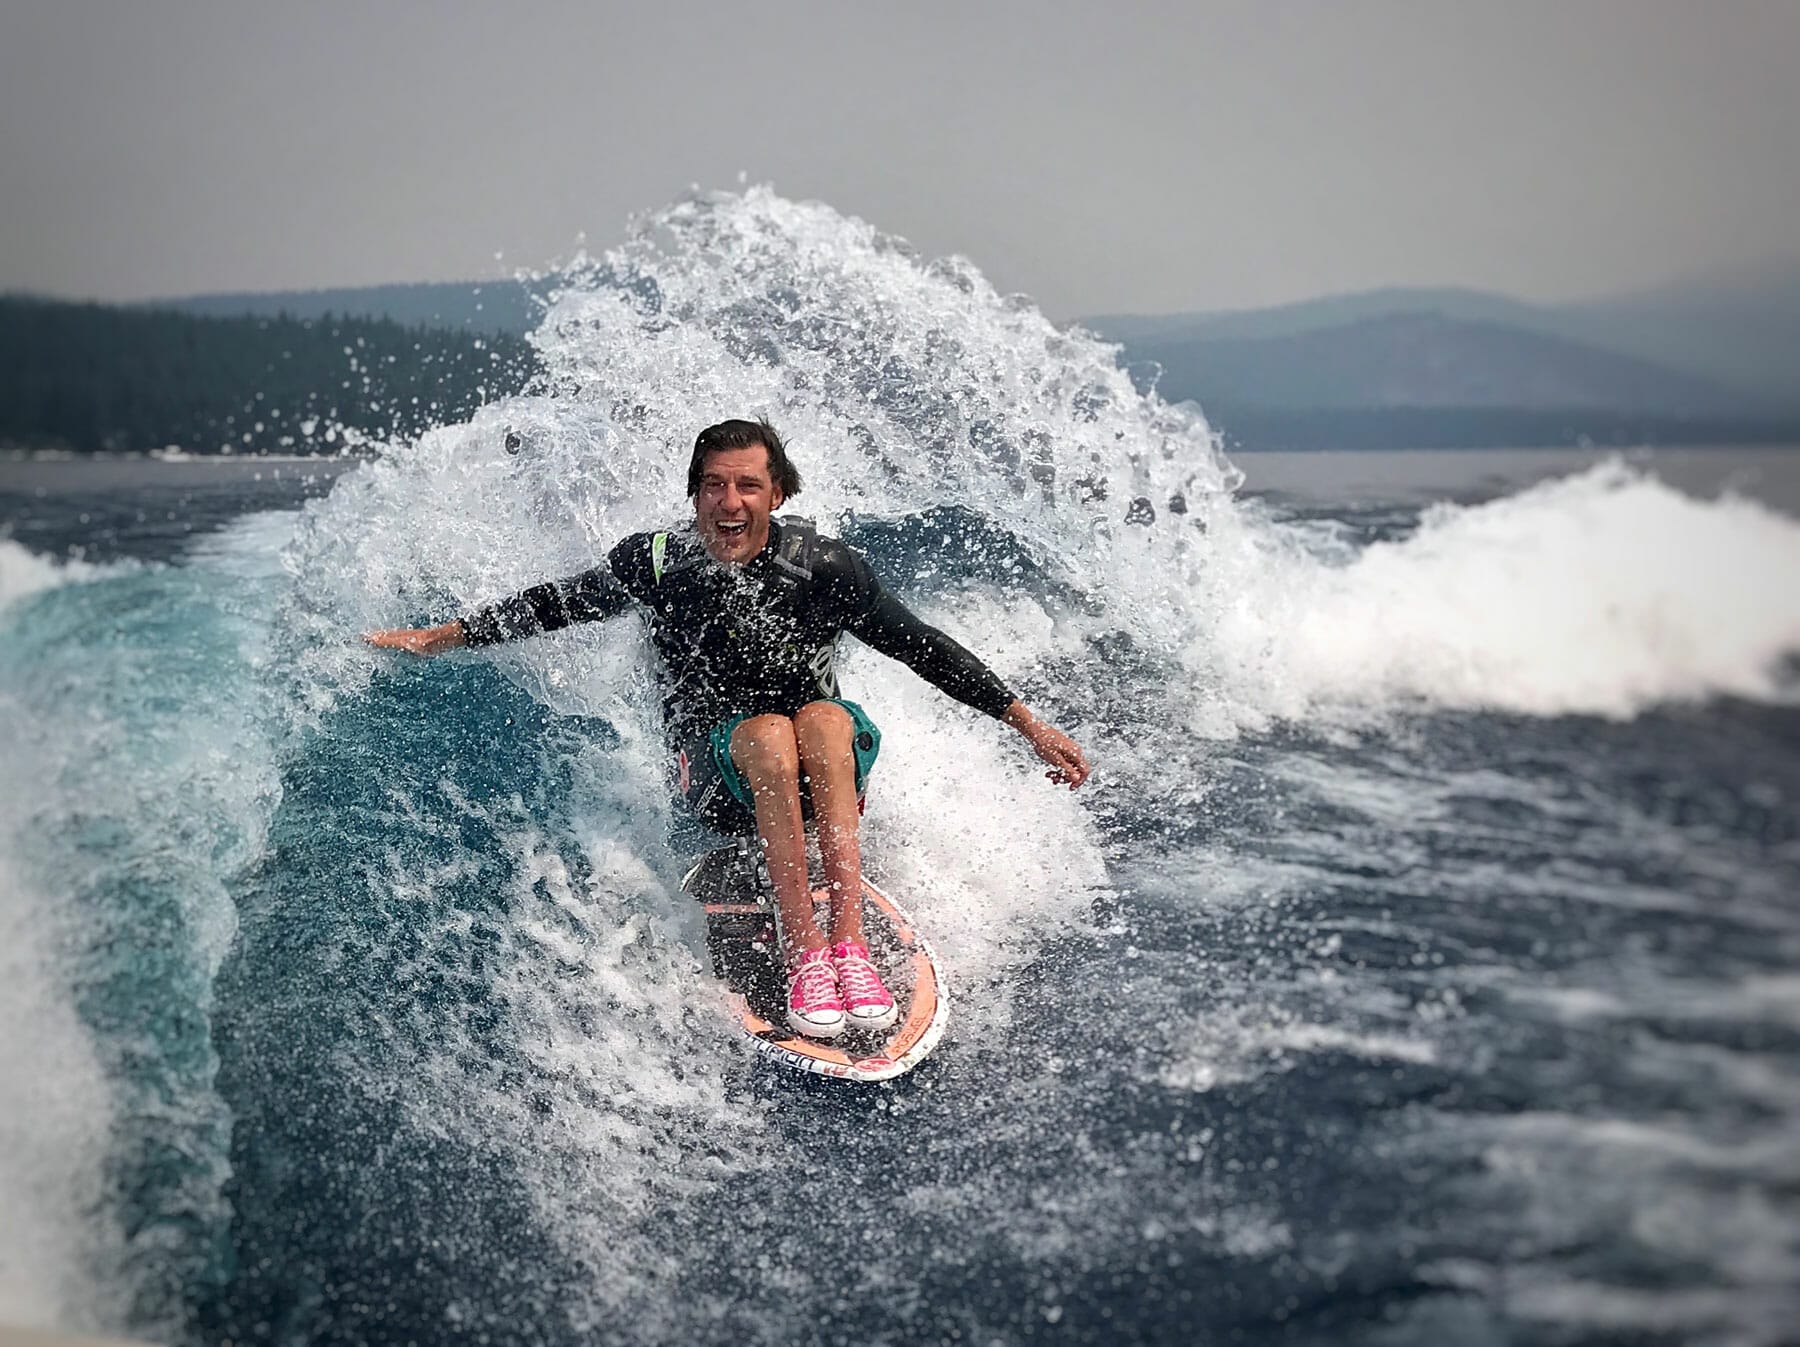 A person riding a wave on a wakesurf board.